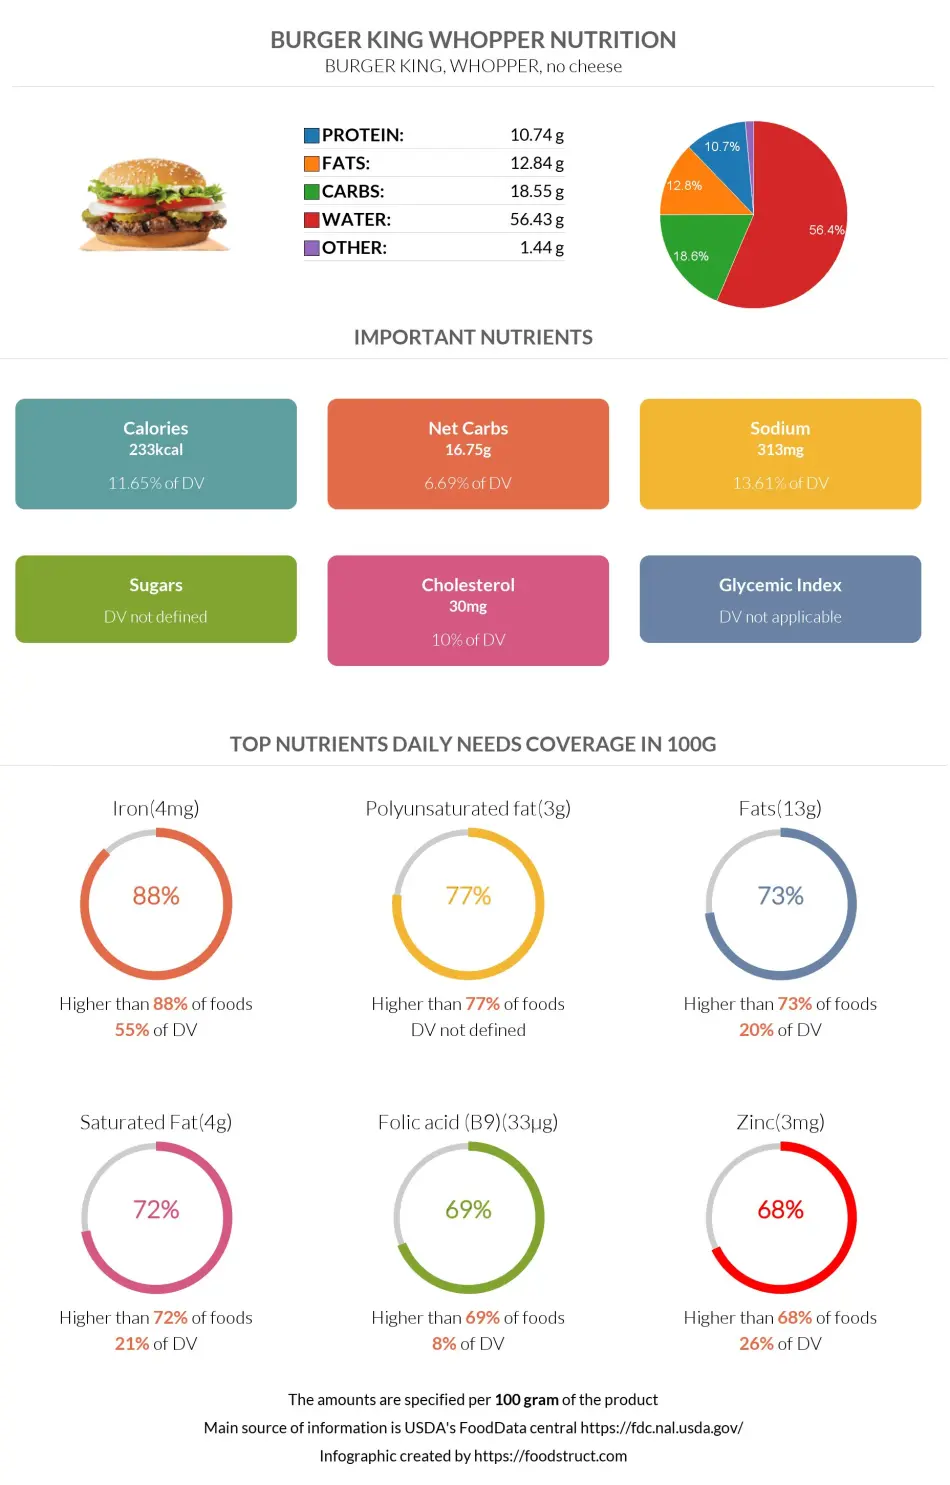 Burger King Whopper nutrition infographic